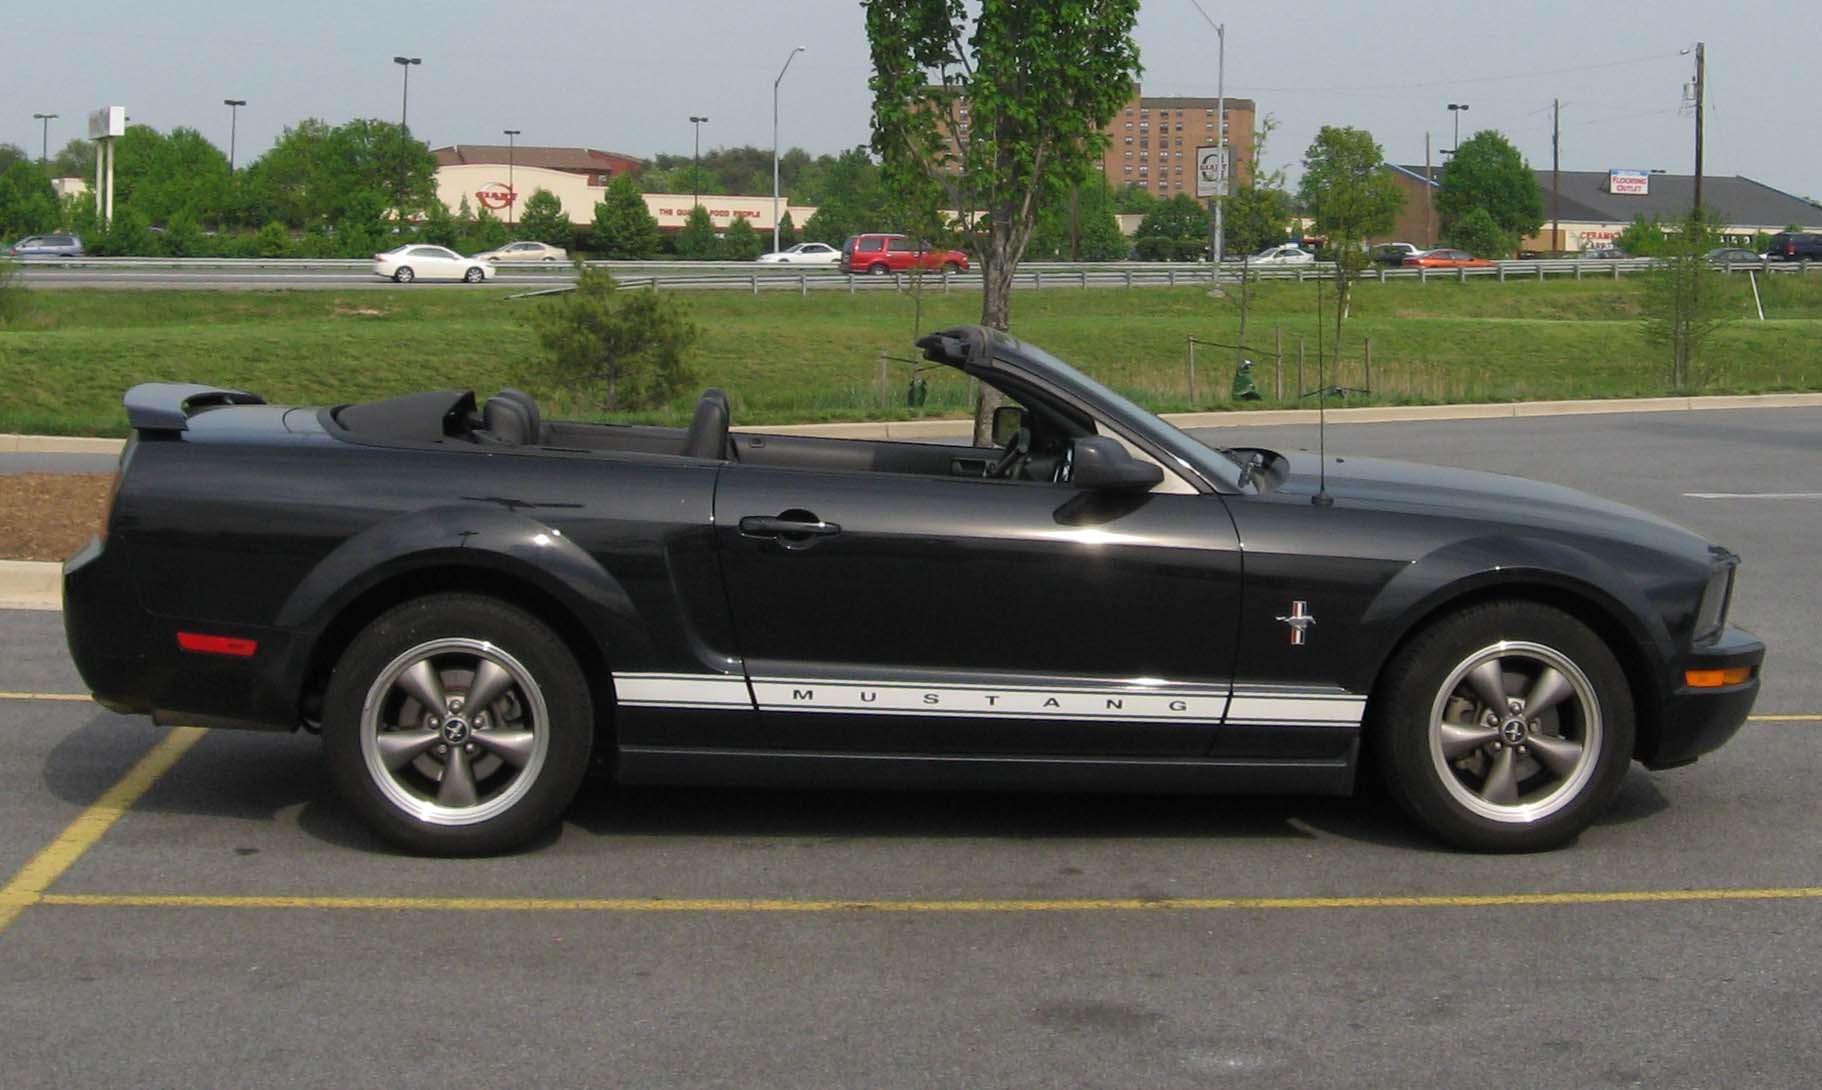 Ford-Mustang-Pony-convertible.jpg